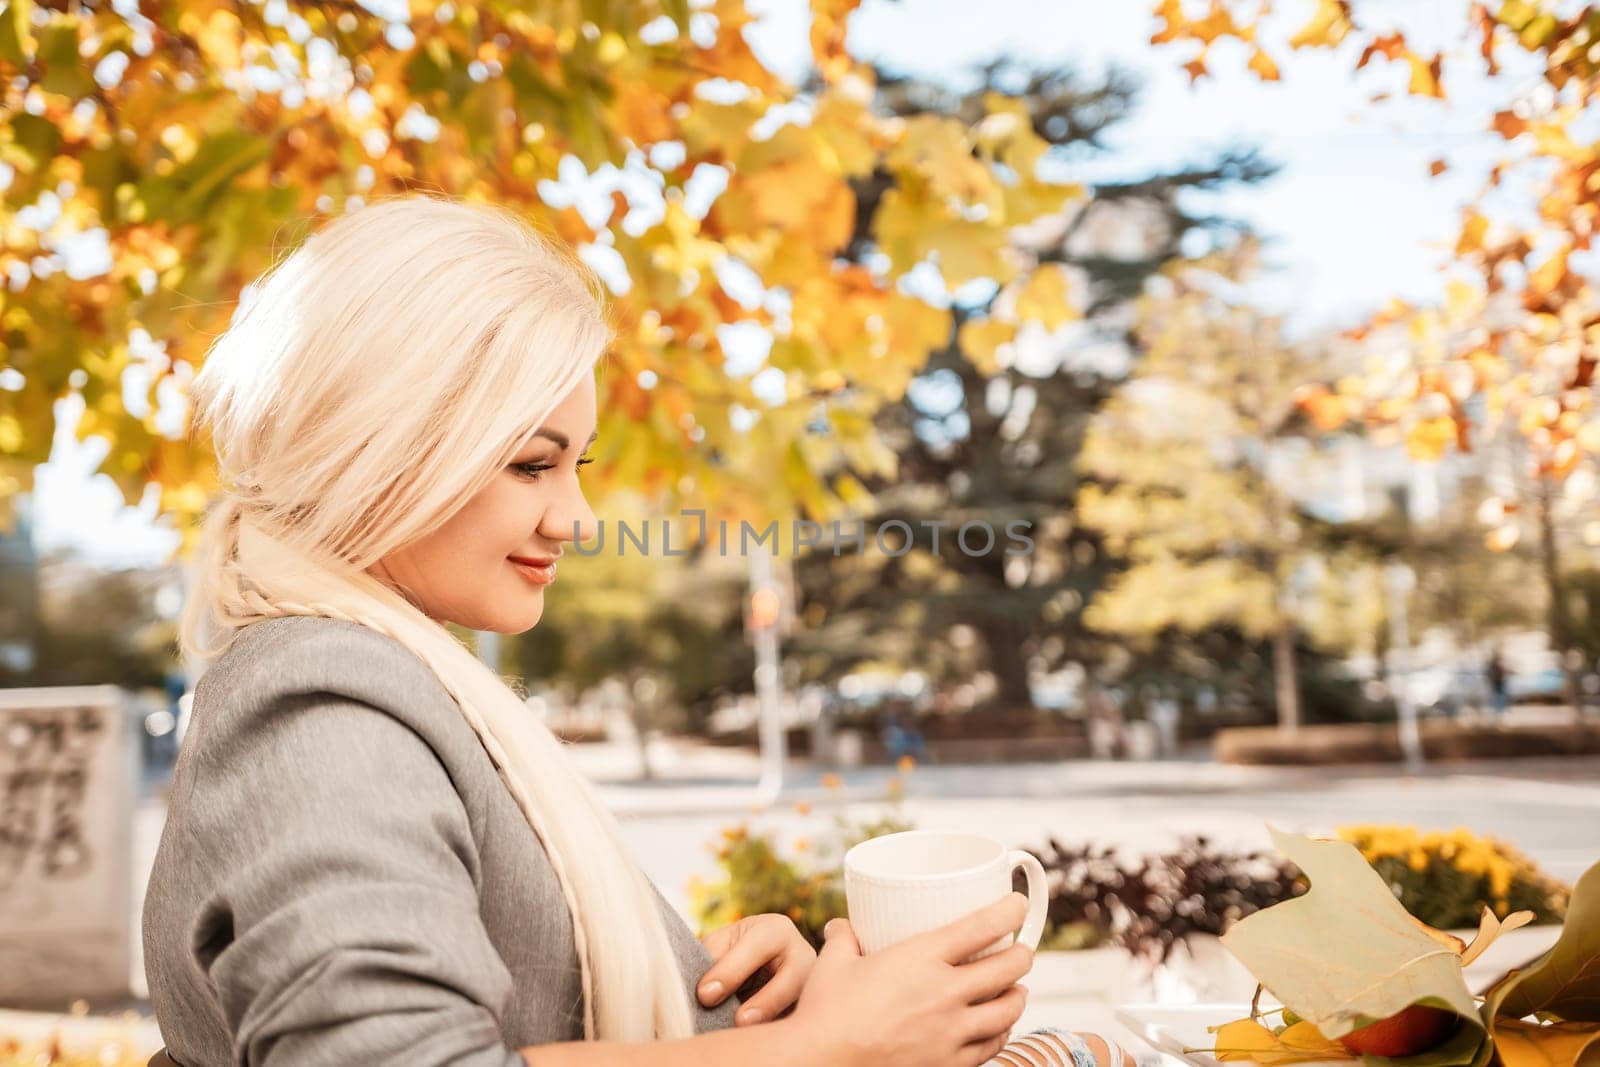 A blonde woman is sitting at a table with a cup of coffee. She is wearing a gray jacket and has a smile on her face. The scene takes place in a park with trees in the background